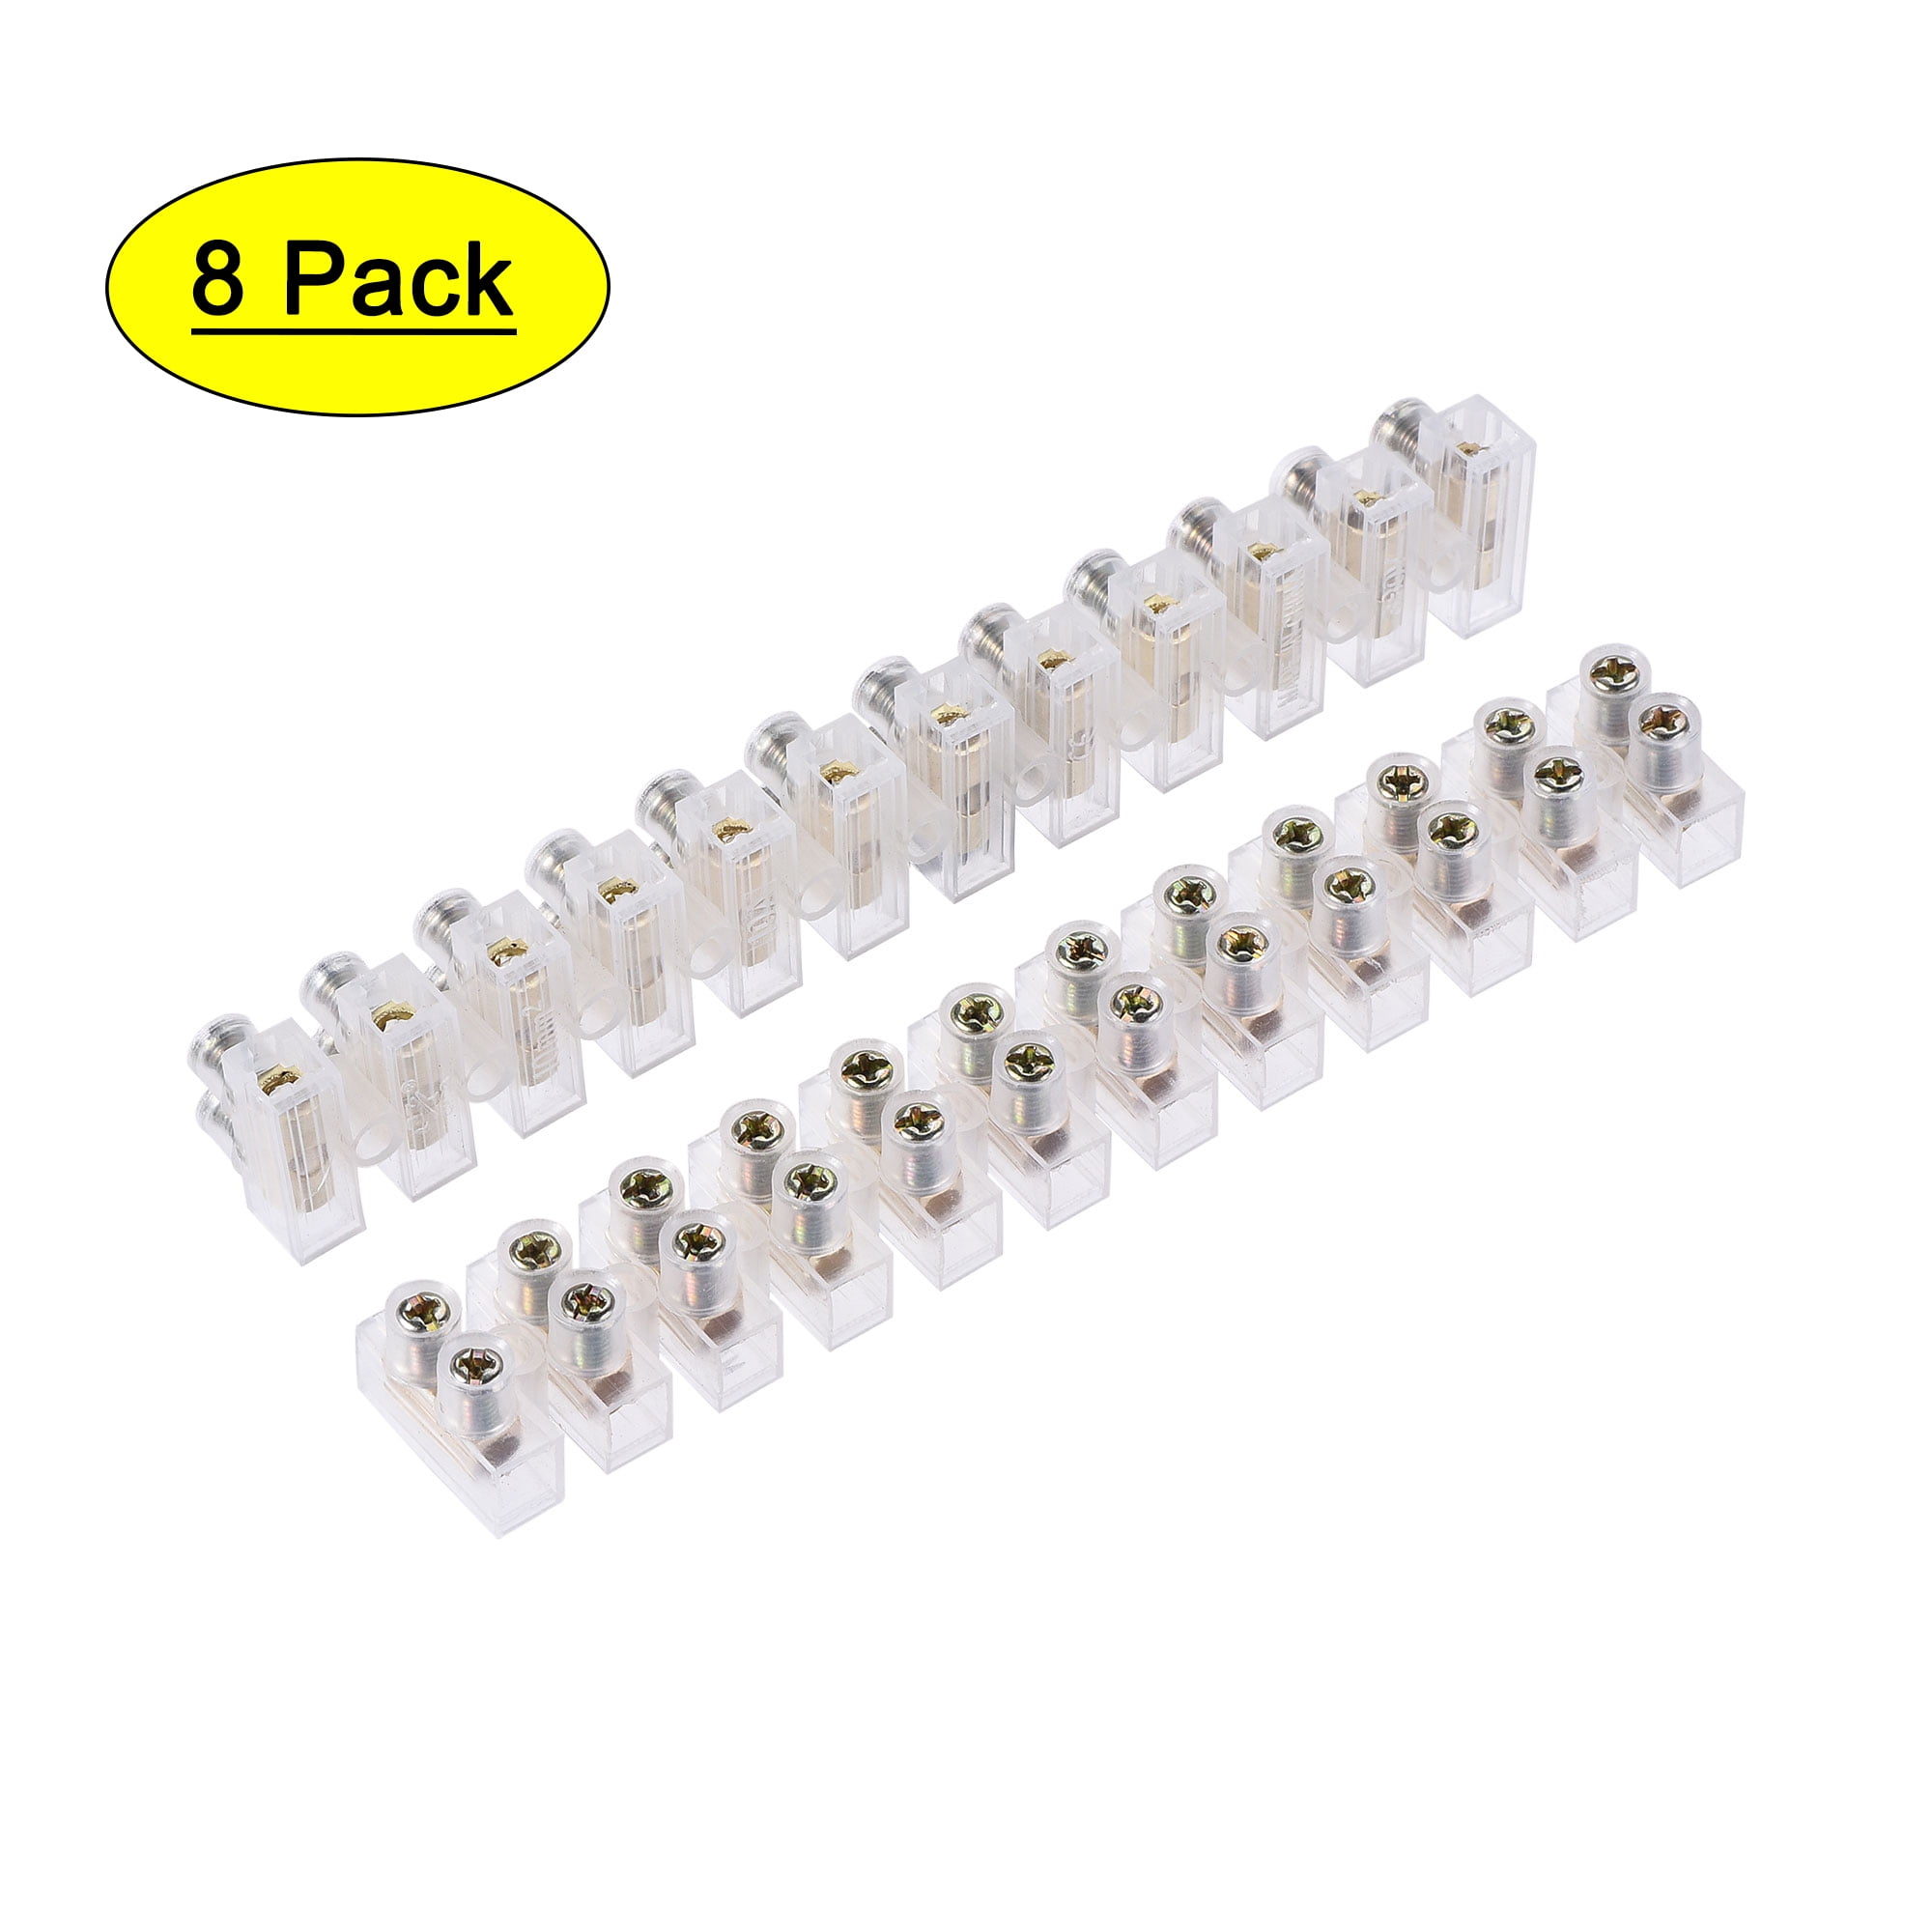 3 Pcs 8 Positions Dual Rows Covered Barrier Screw Terminal Block 